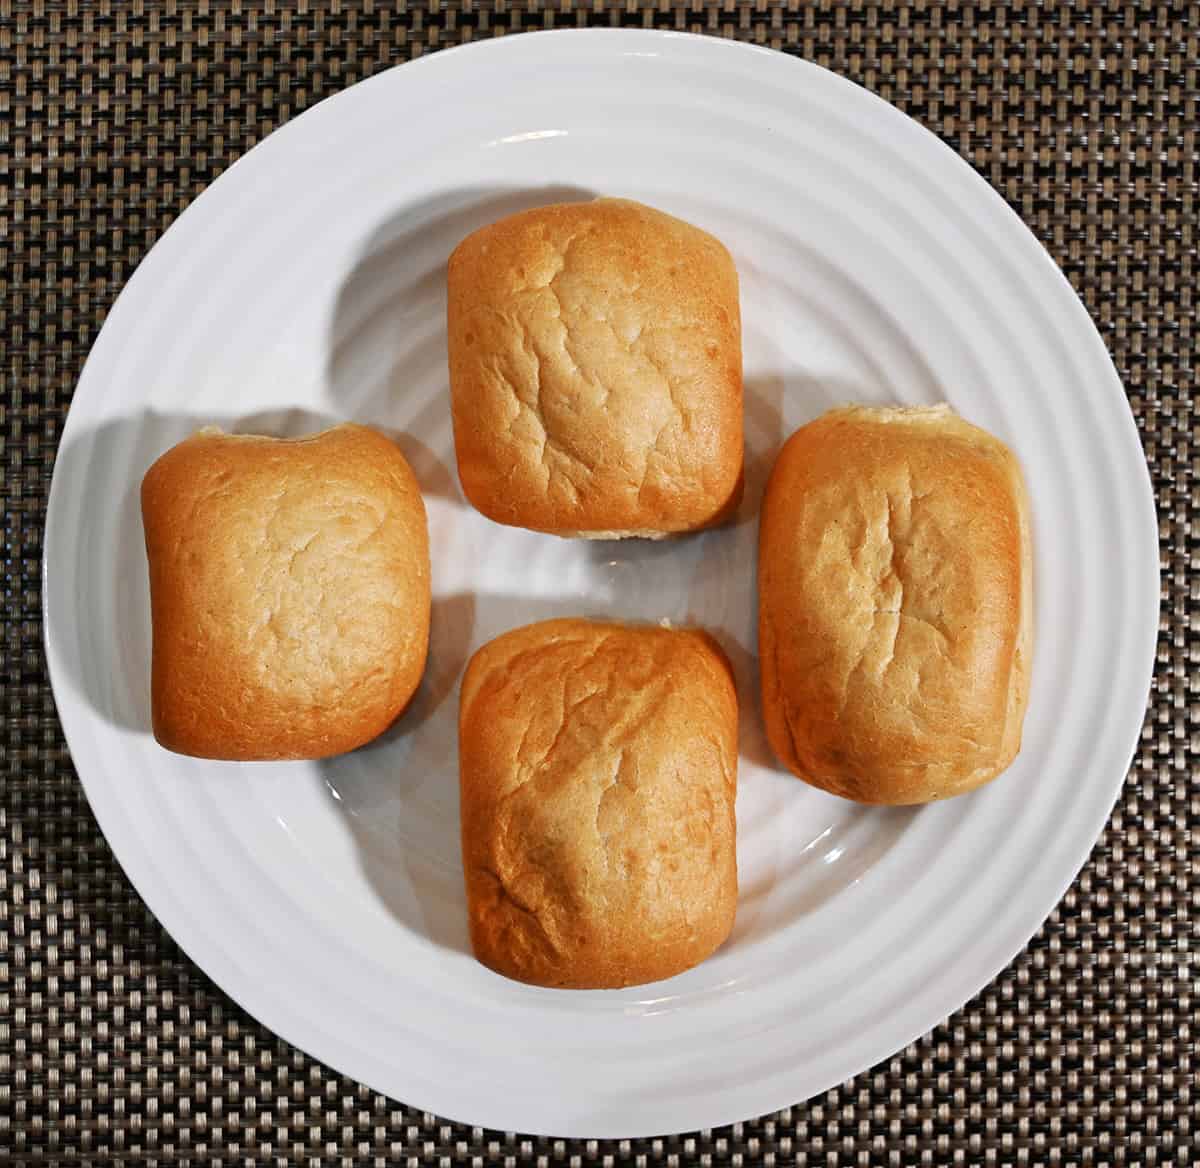 Top down image of four Italian ciabatta buns sitting on a white plate.